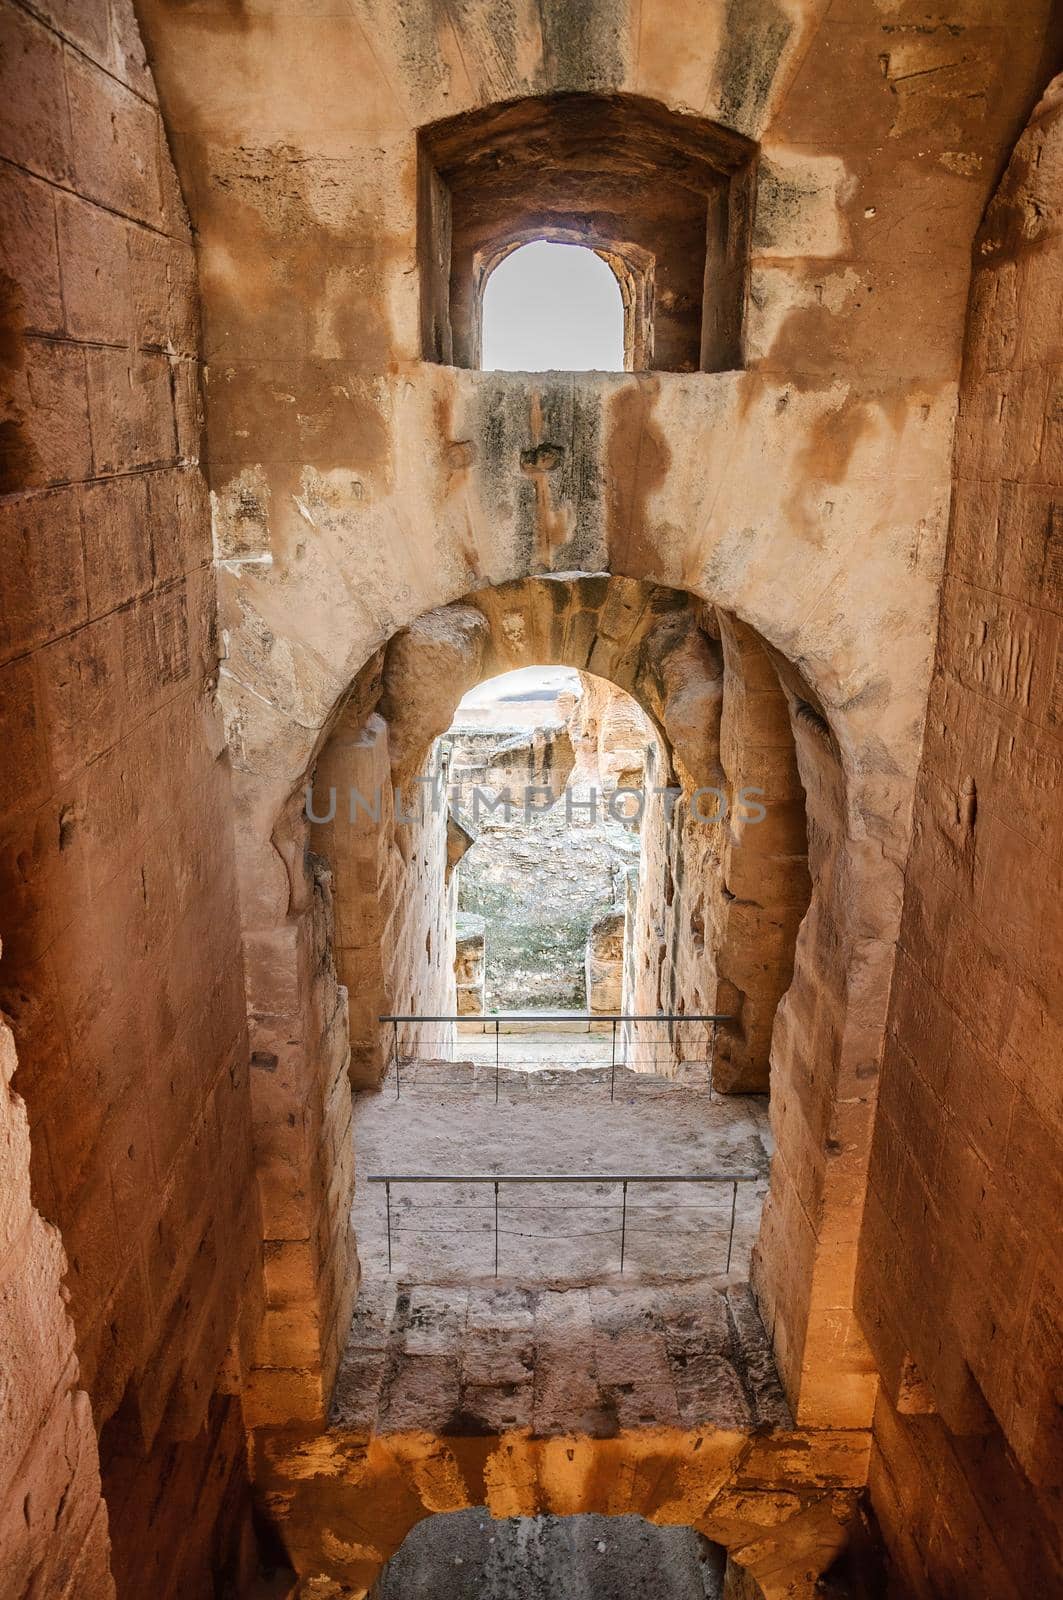 Arch in ruins of the largest coliseum, North Africa. El Jem,Tunisia, UNESCO by Eagle2308